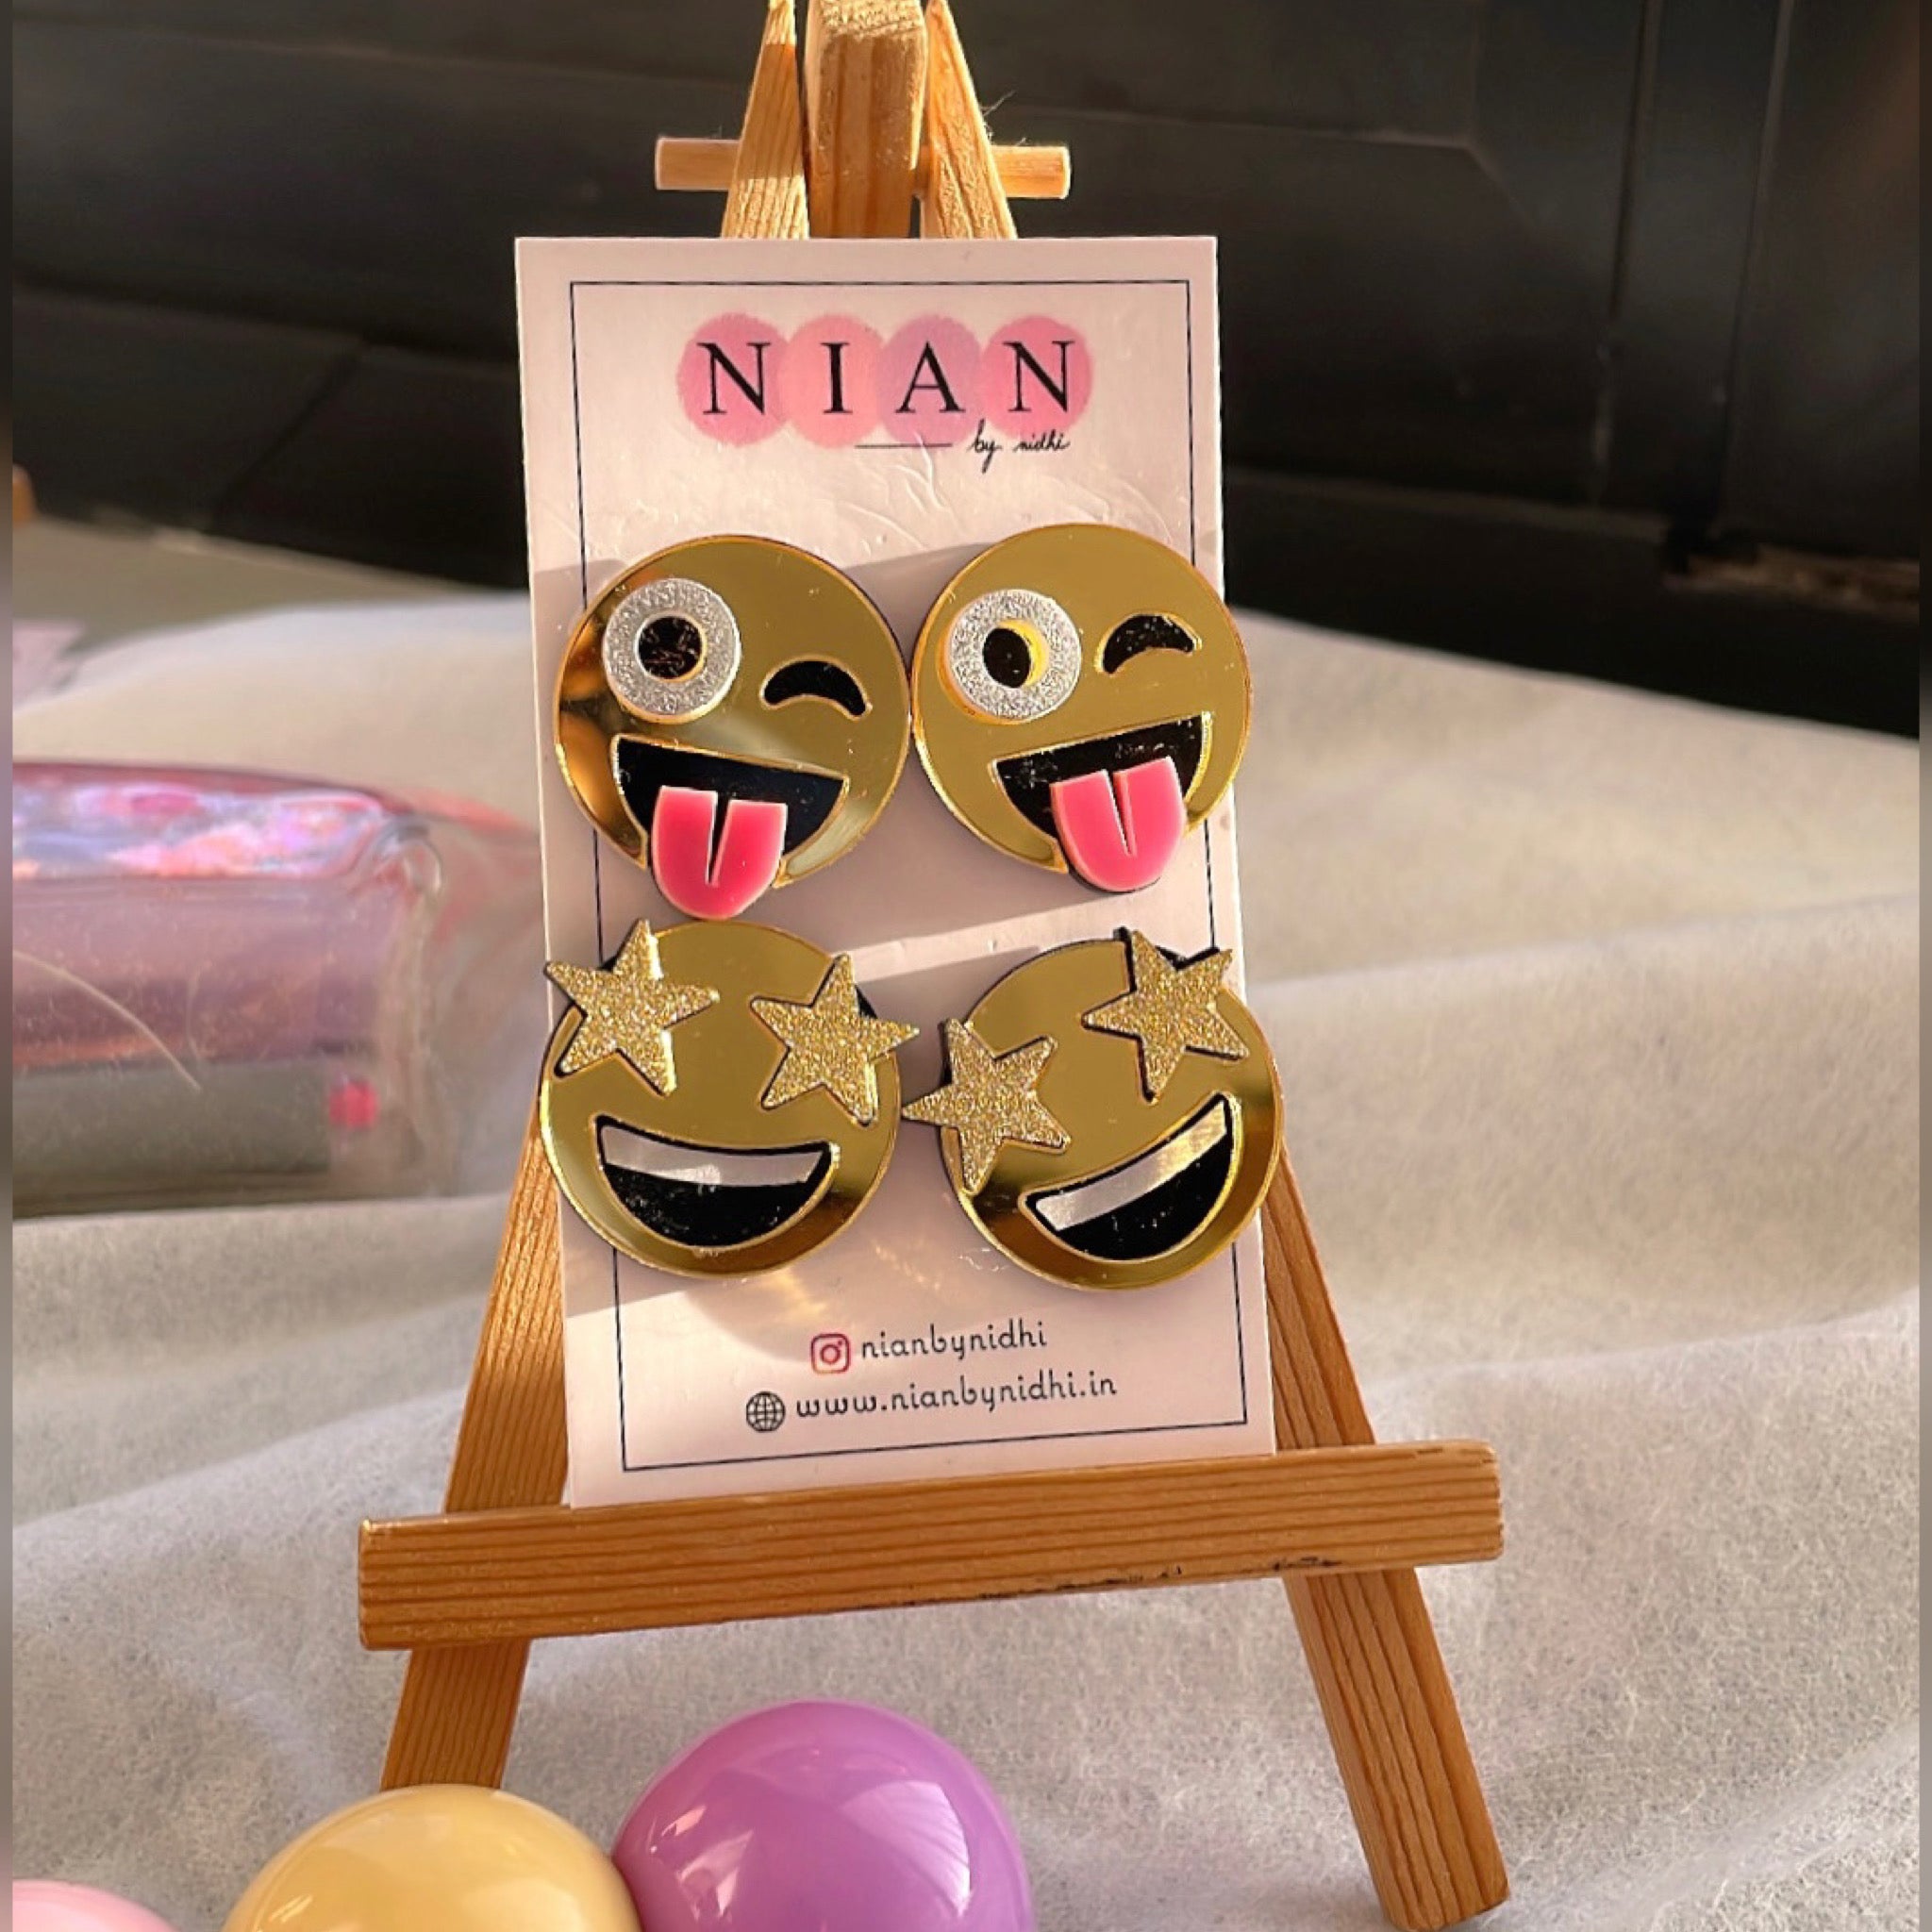 Emoji Studs Combo (Set of 2) - consists Goofy Emoji Studs and Star-Struck Emoji Studs - Golden with face detailings - Nian by Nidhi - placed on a small wooden canvas